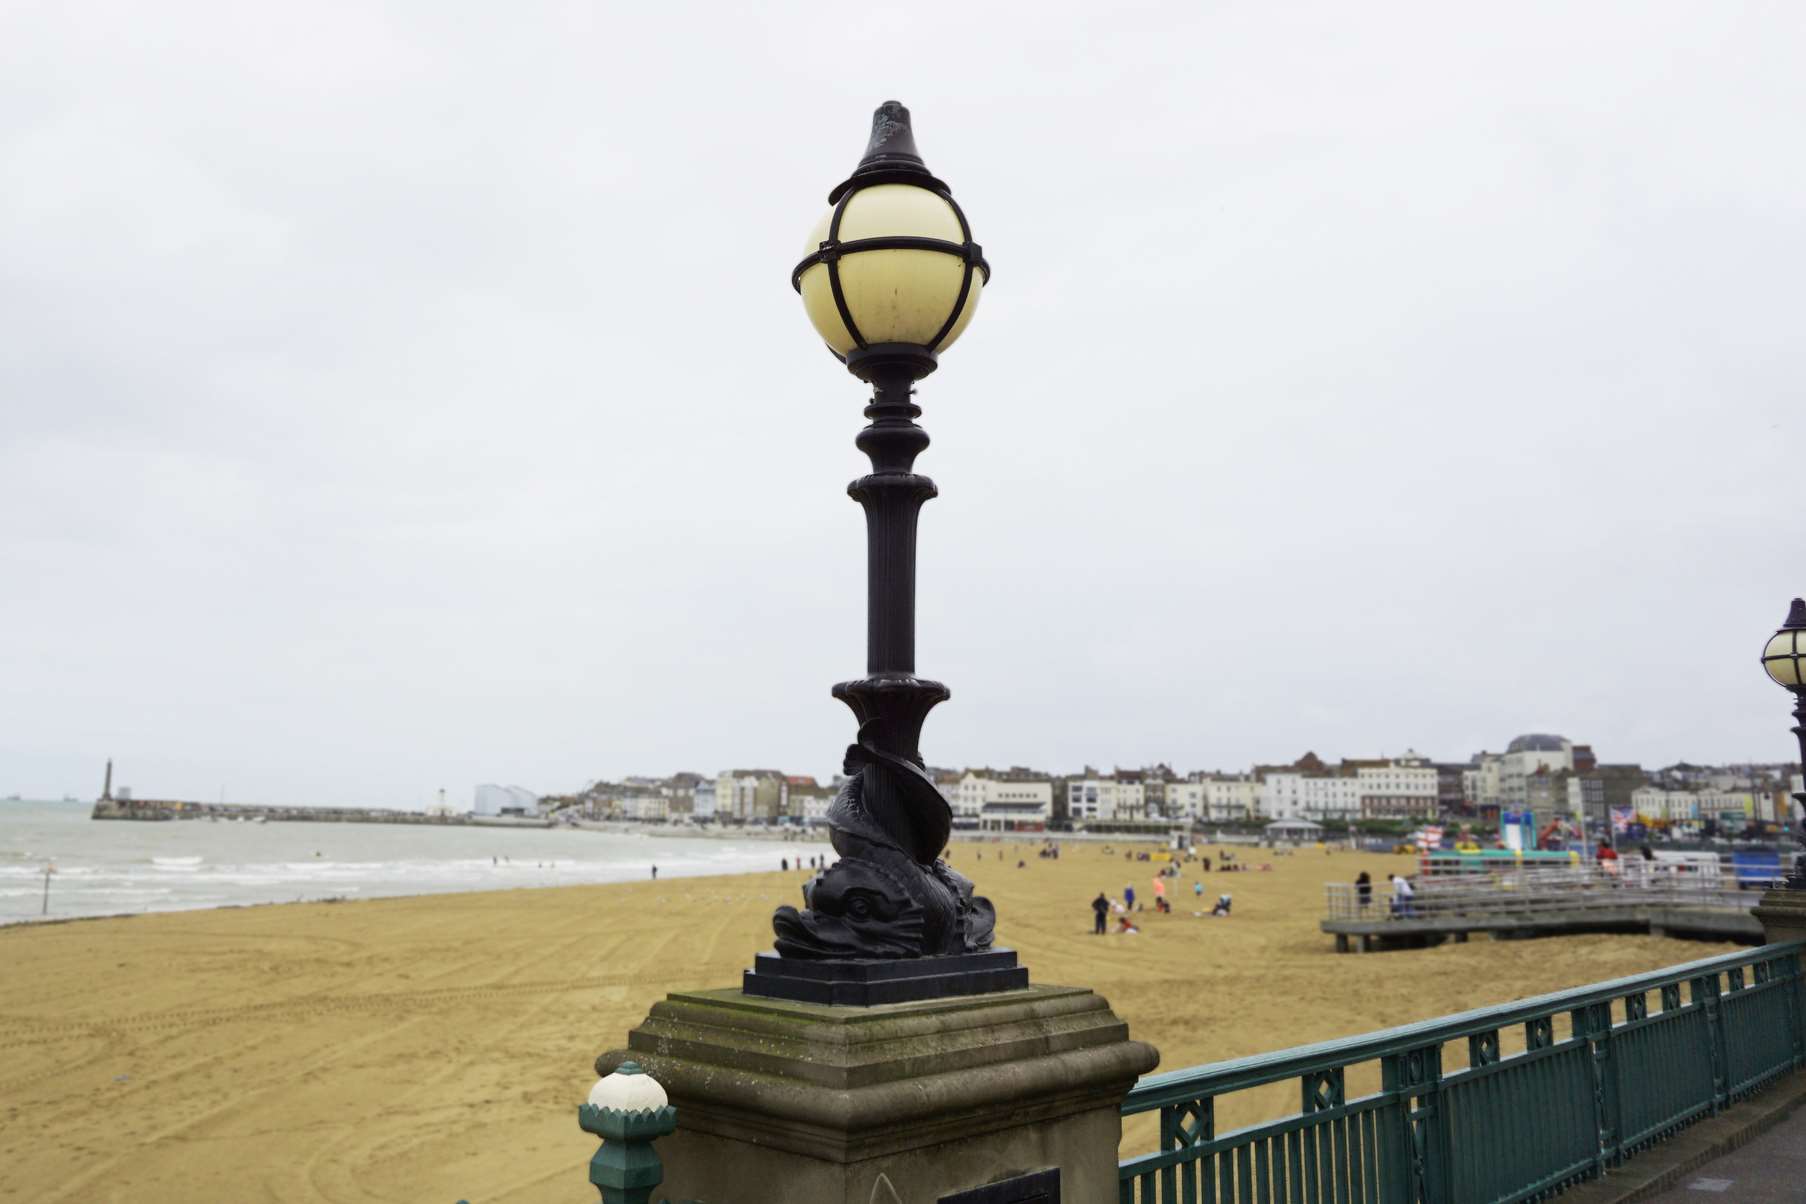 For at least 250 years, Margate has been one of the leading seaside resort in the country, drawing Londoners to its beaches